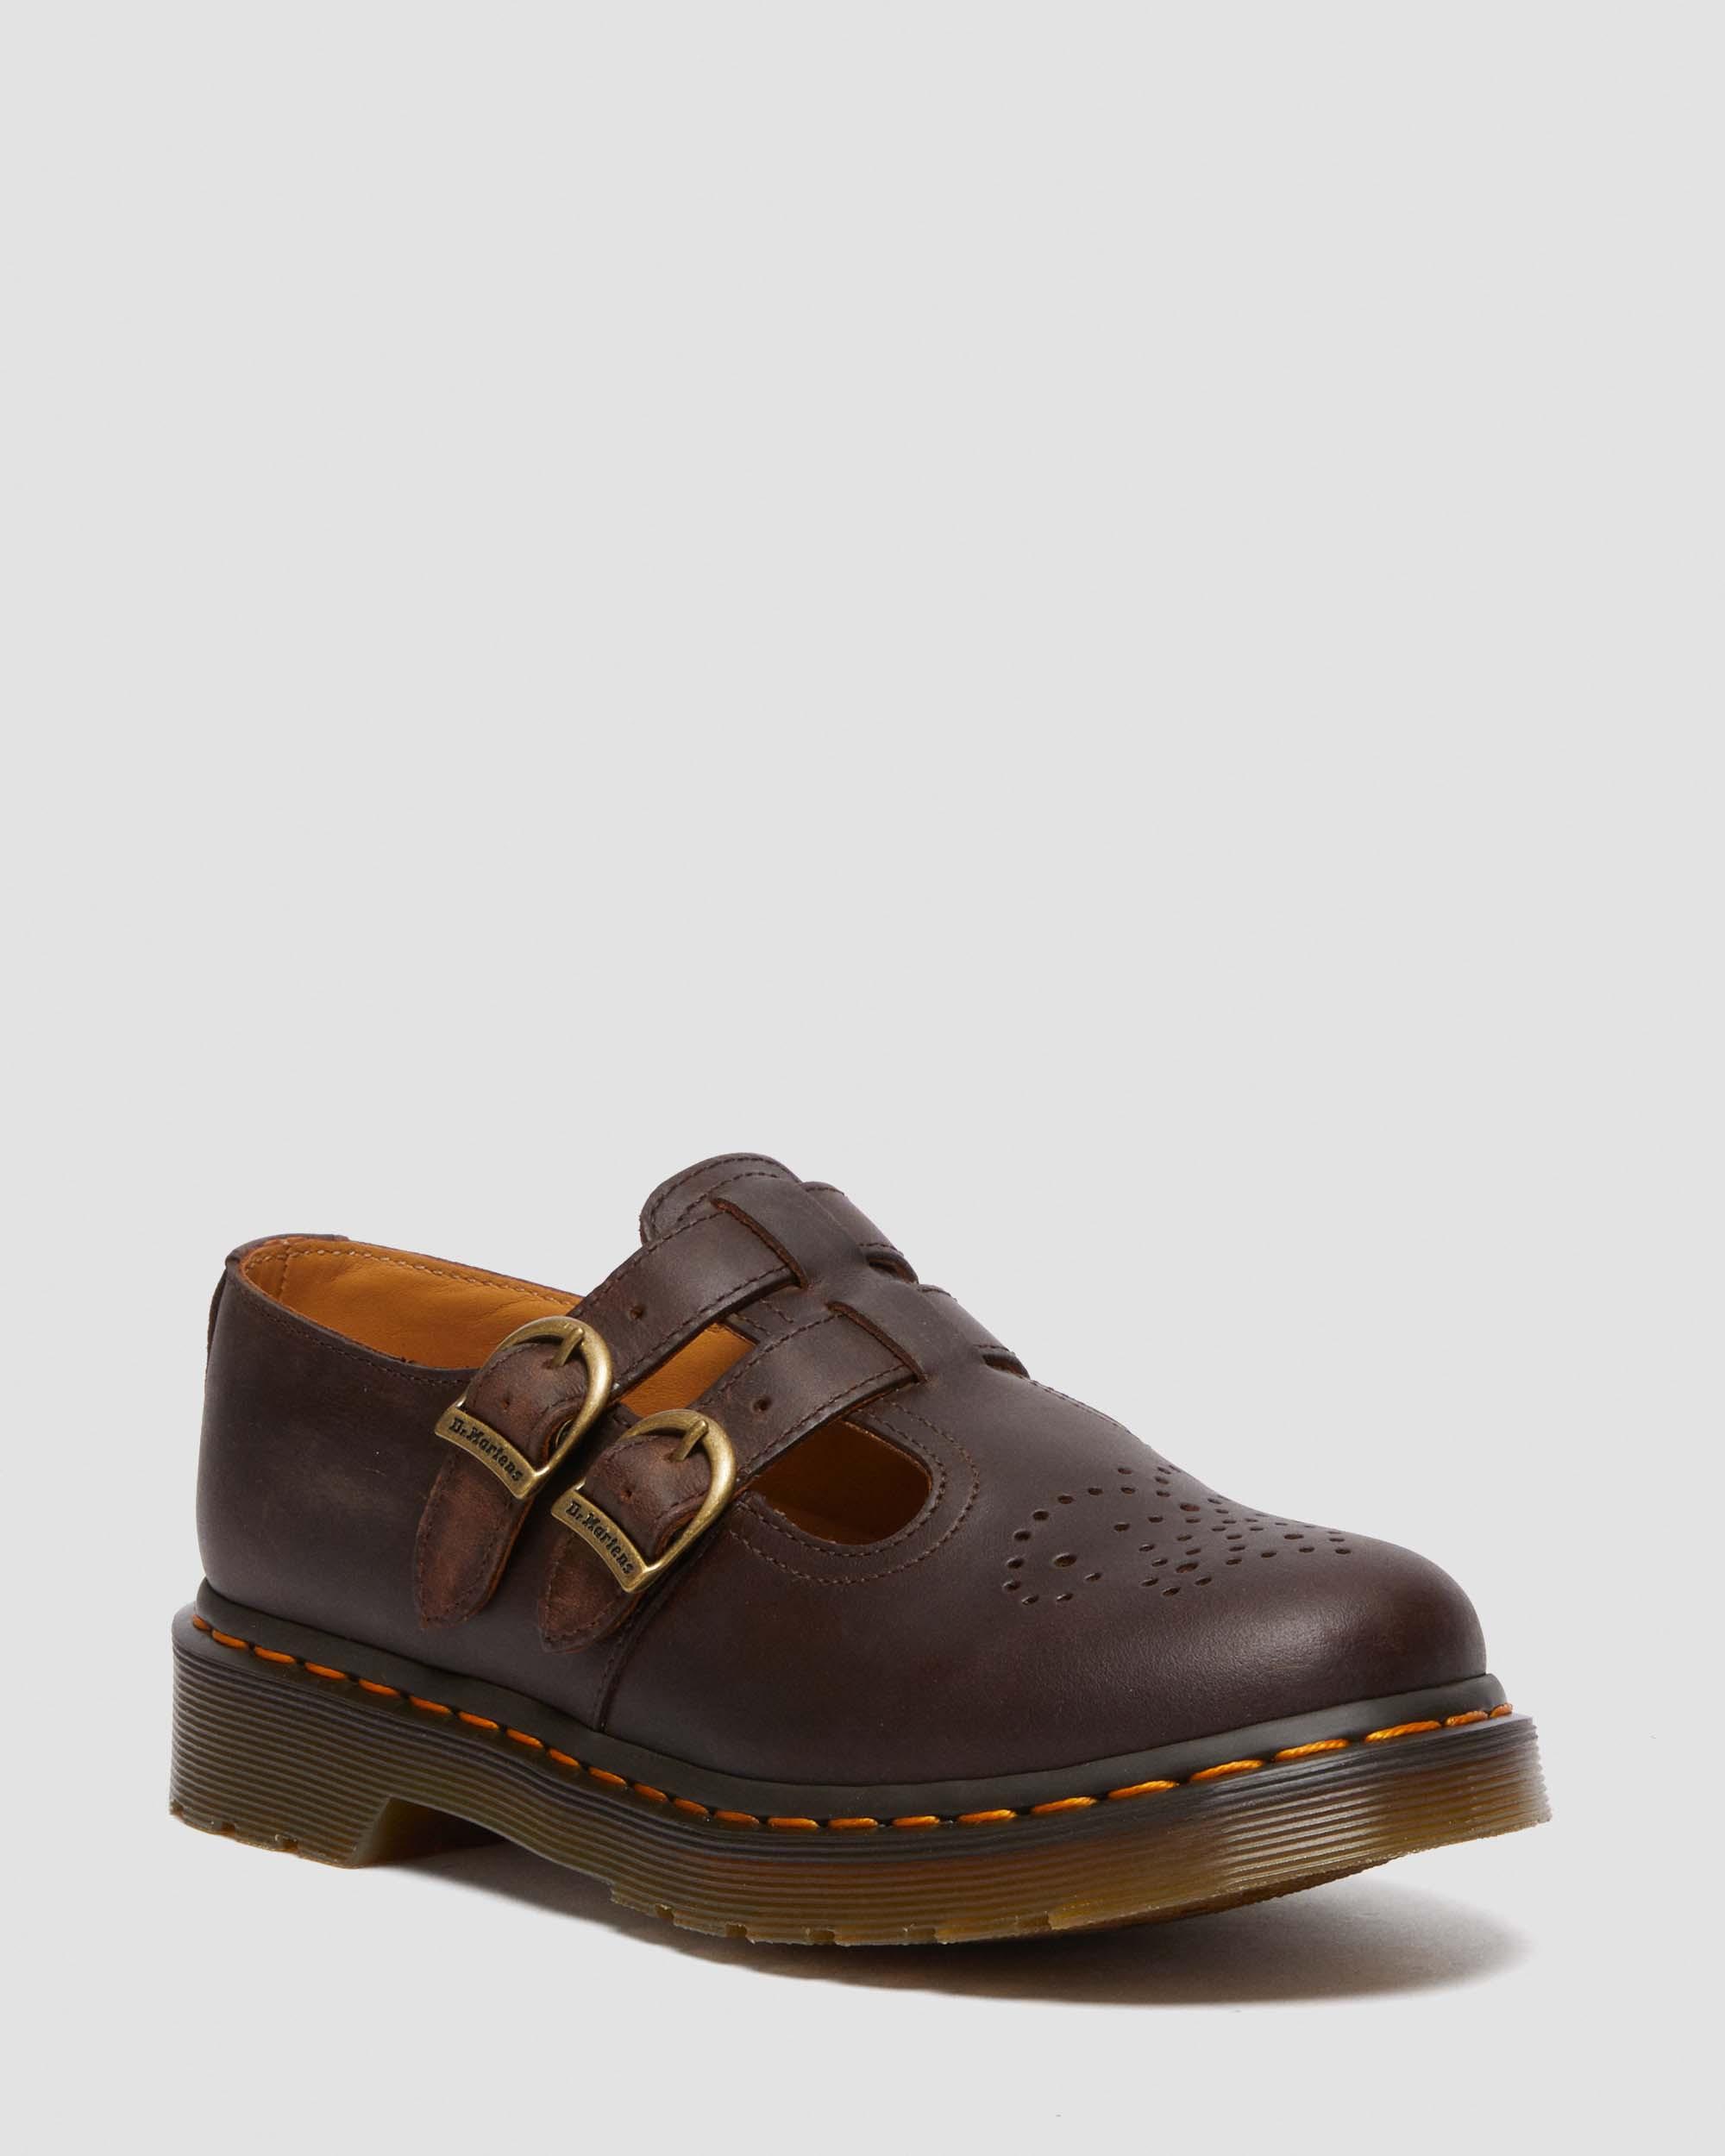 Mary Jane Shoes | FREE SHIPPING | Dr. Martens